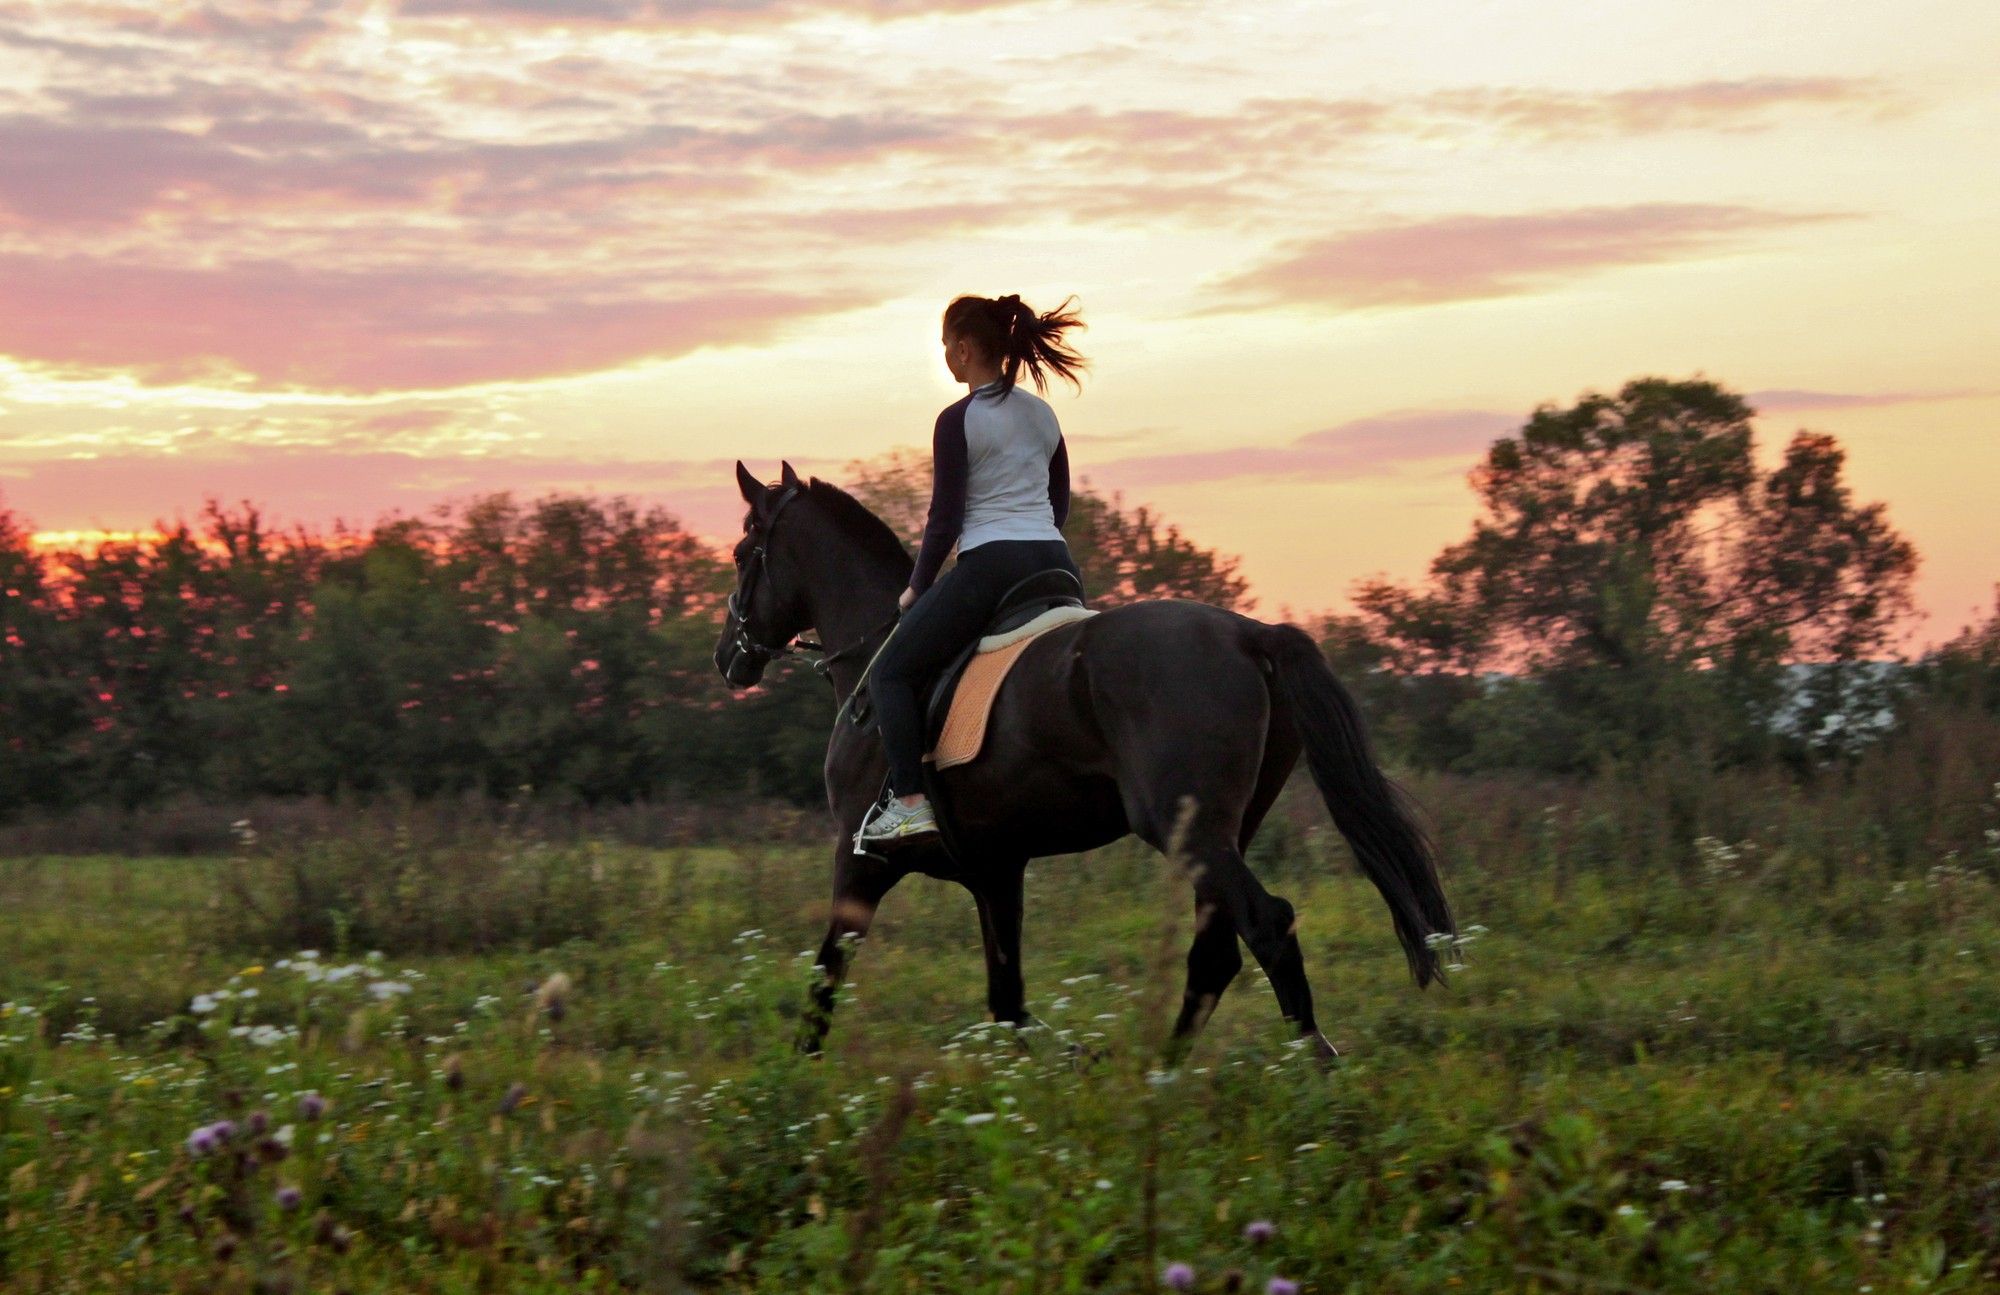 Horse riding, sunset wallpapers and images - wallpapers, pictures ...